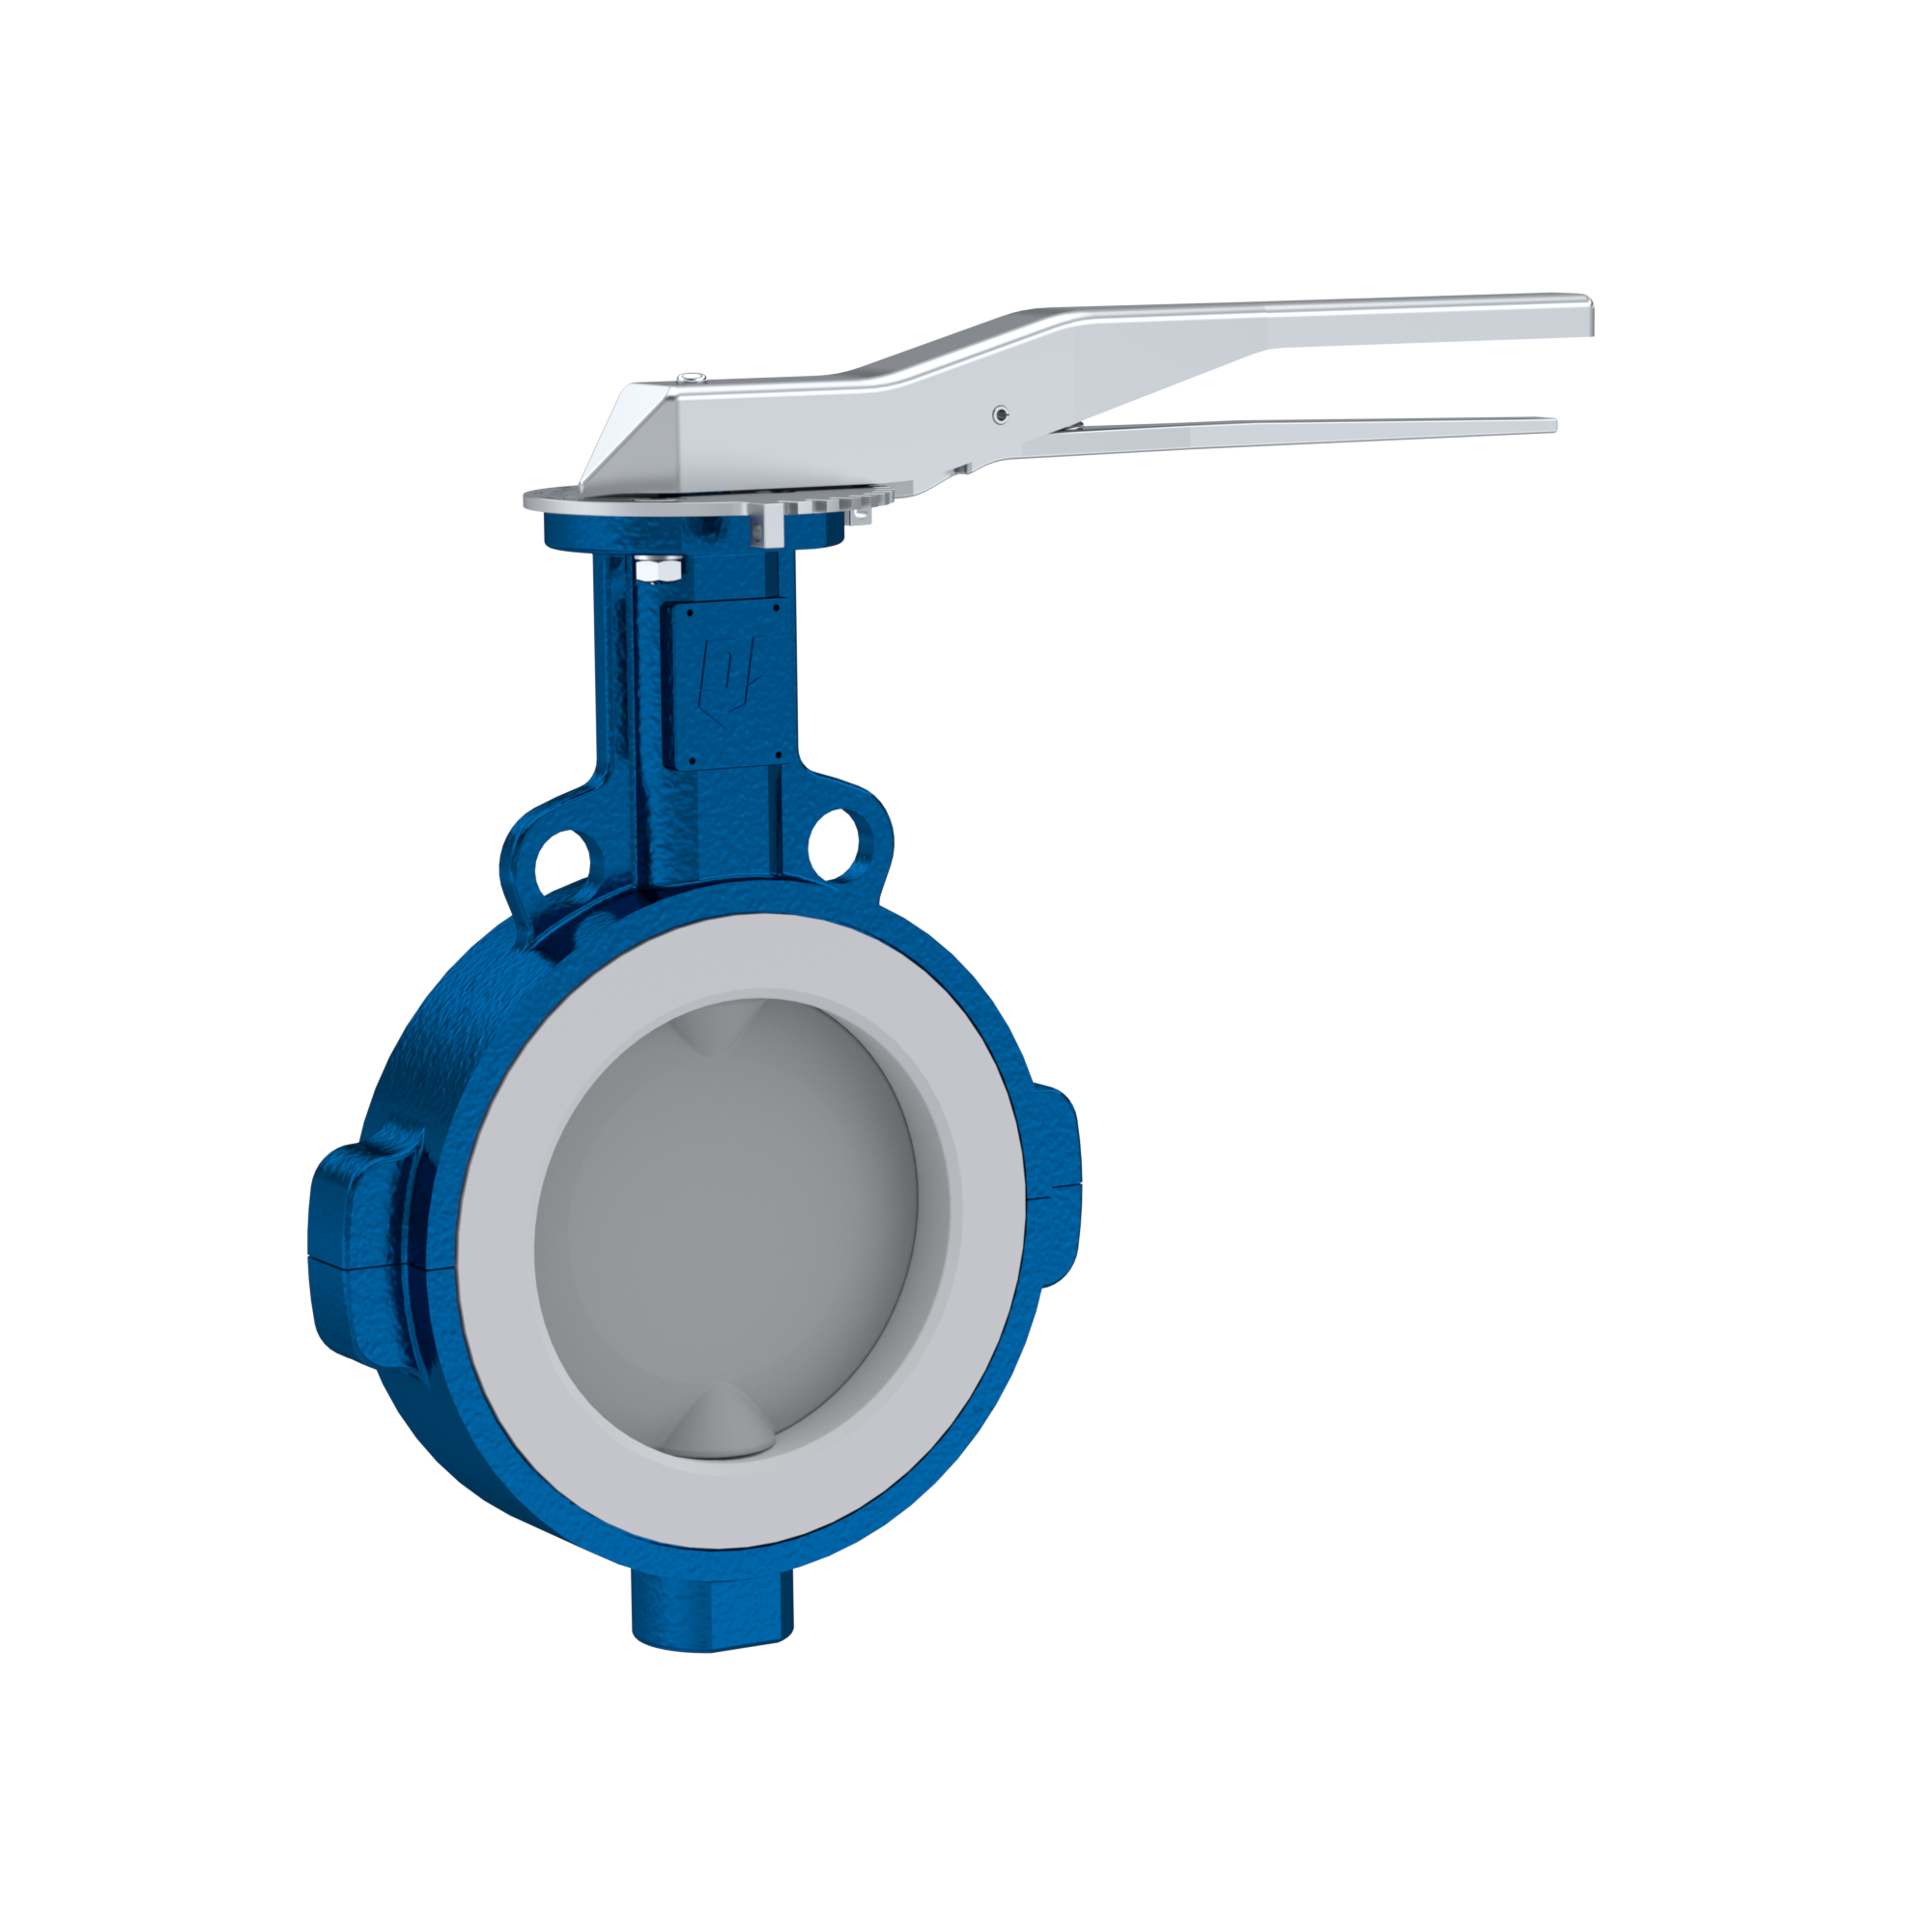 PFA-Butterfly-valve PTFE AK09 DN150 PN10-PN16 lever silicone insert